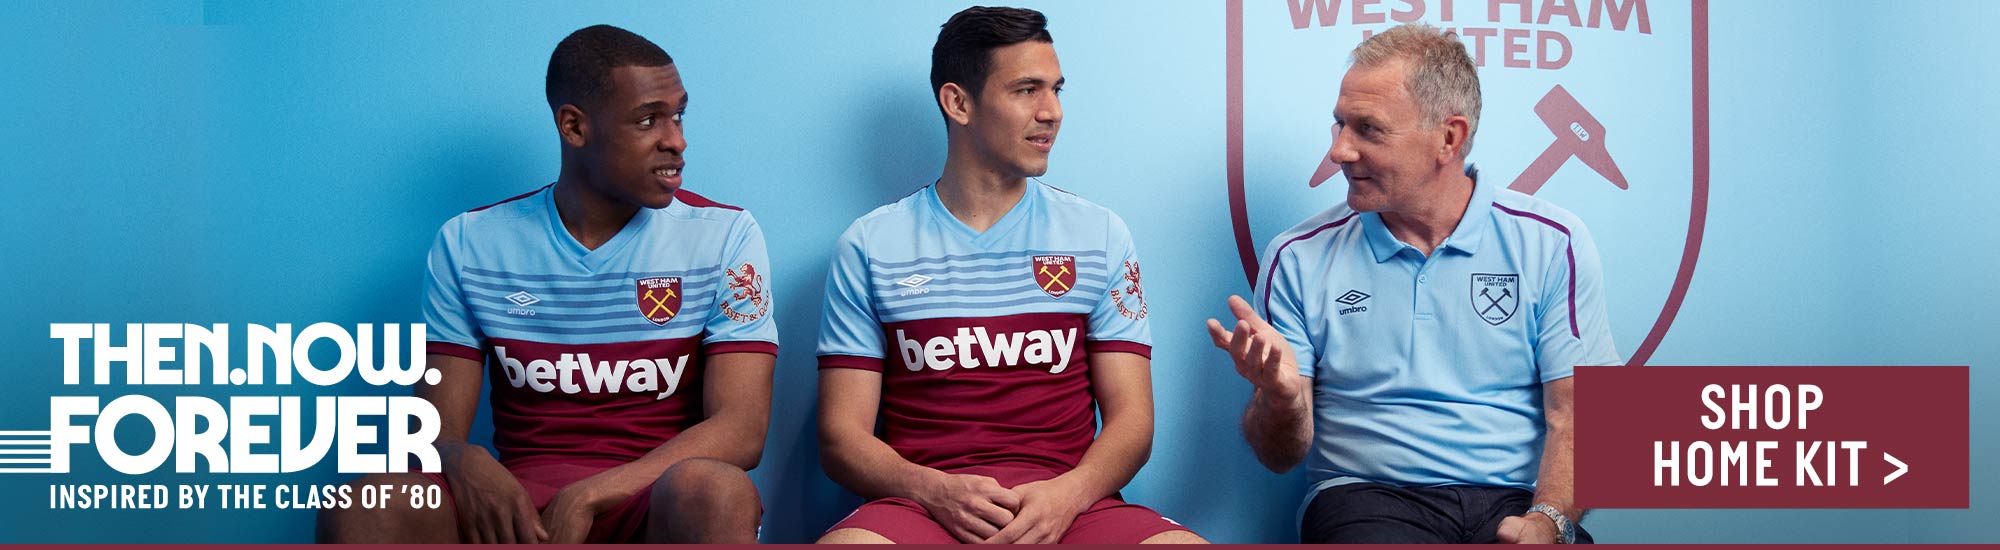 Buy home kit from the official West Ham store